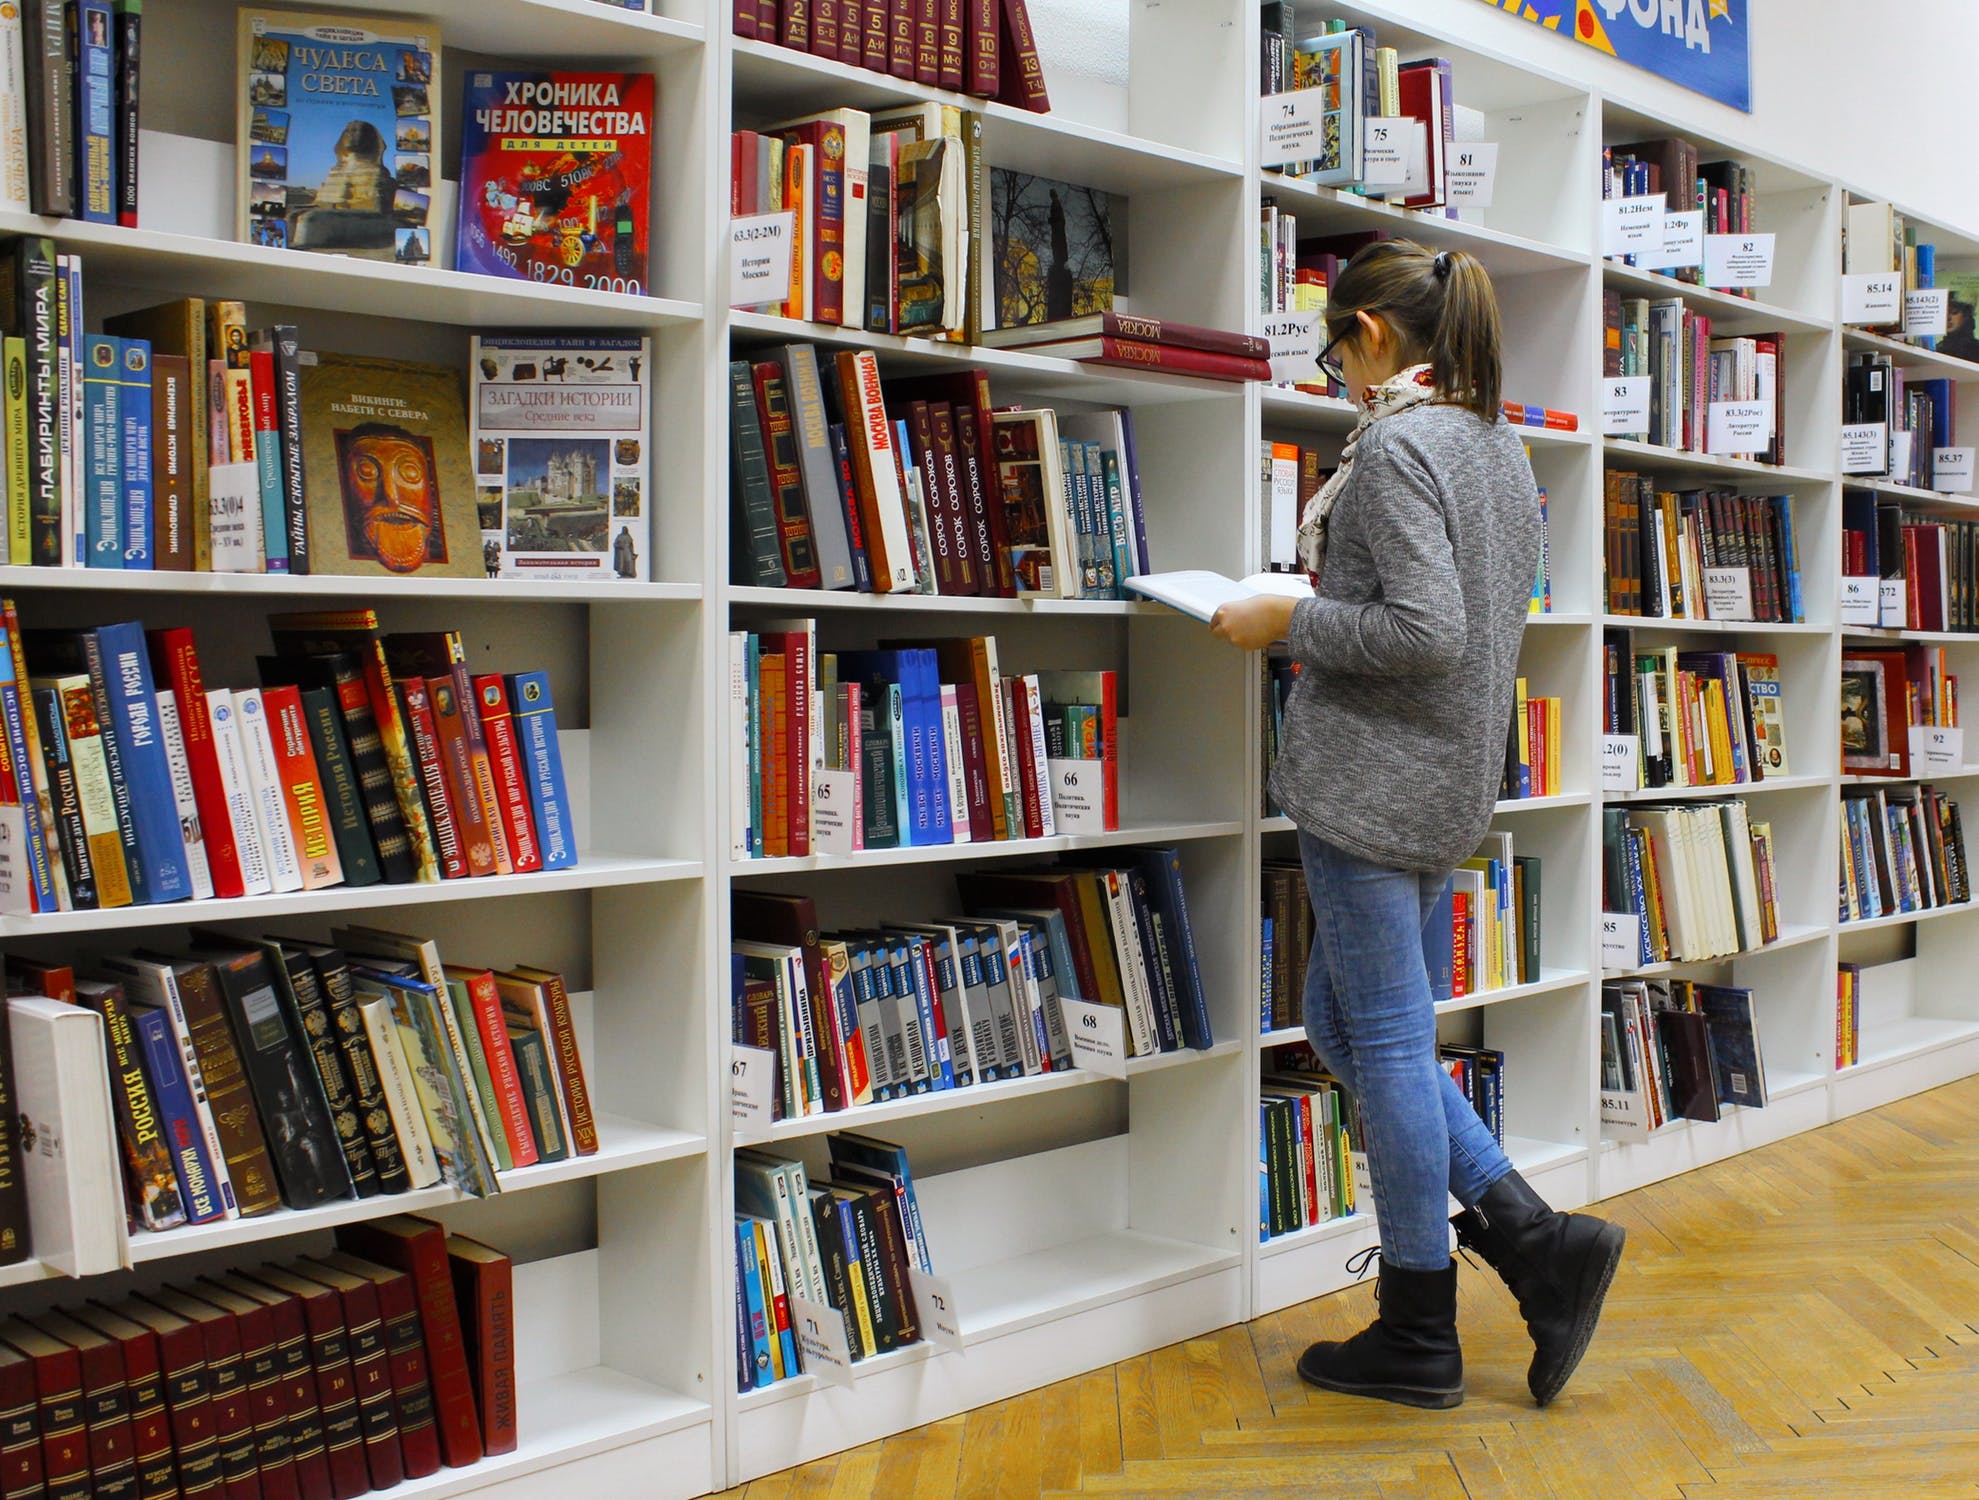 Student looking for books on a shelf.